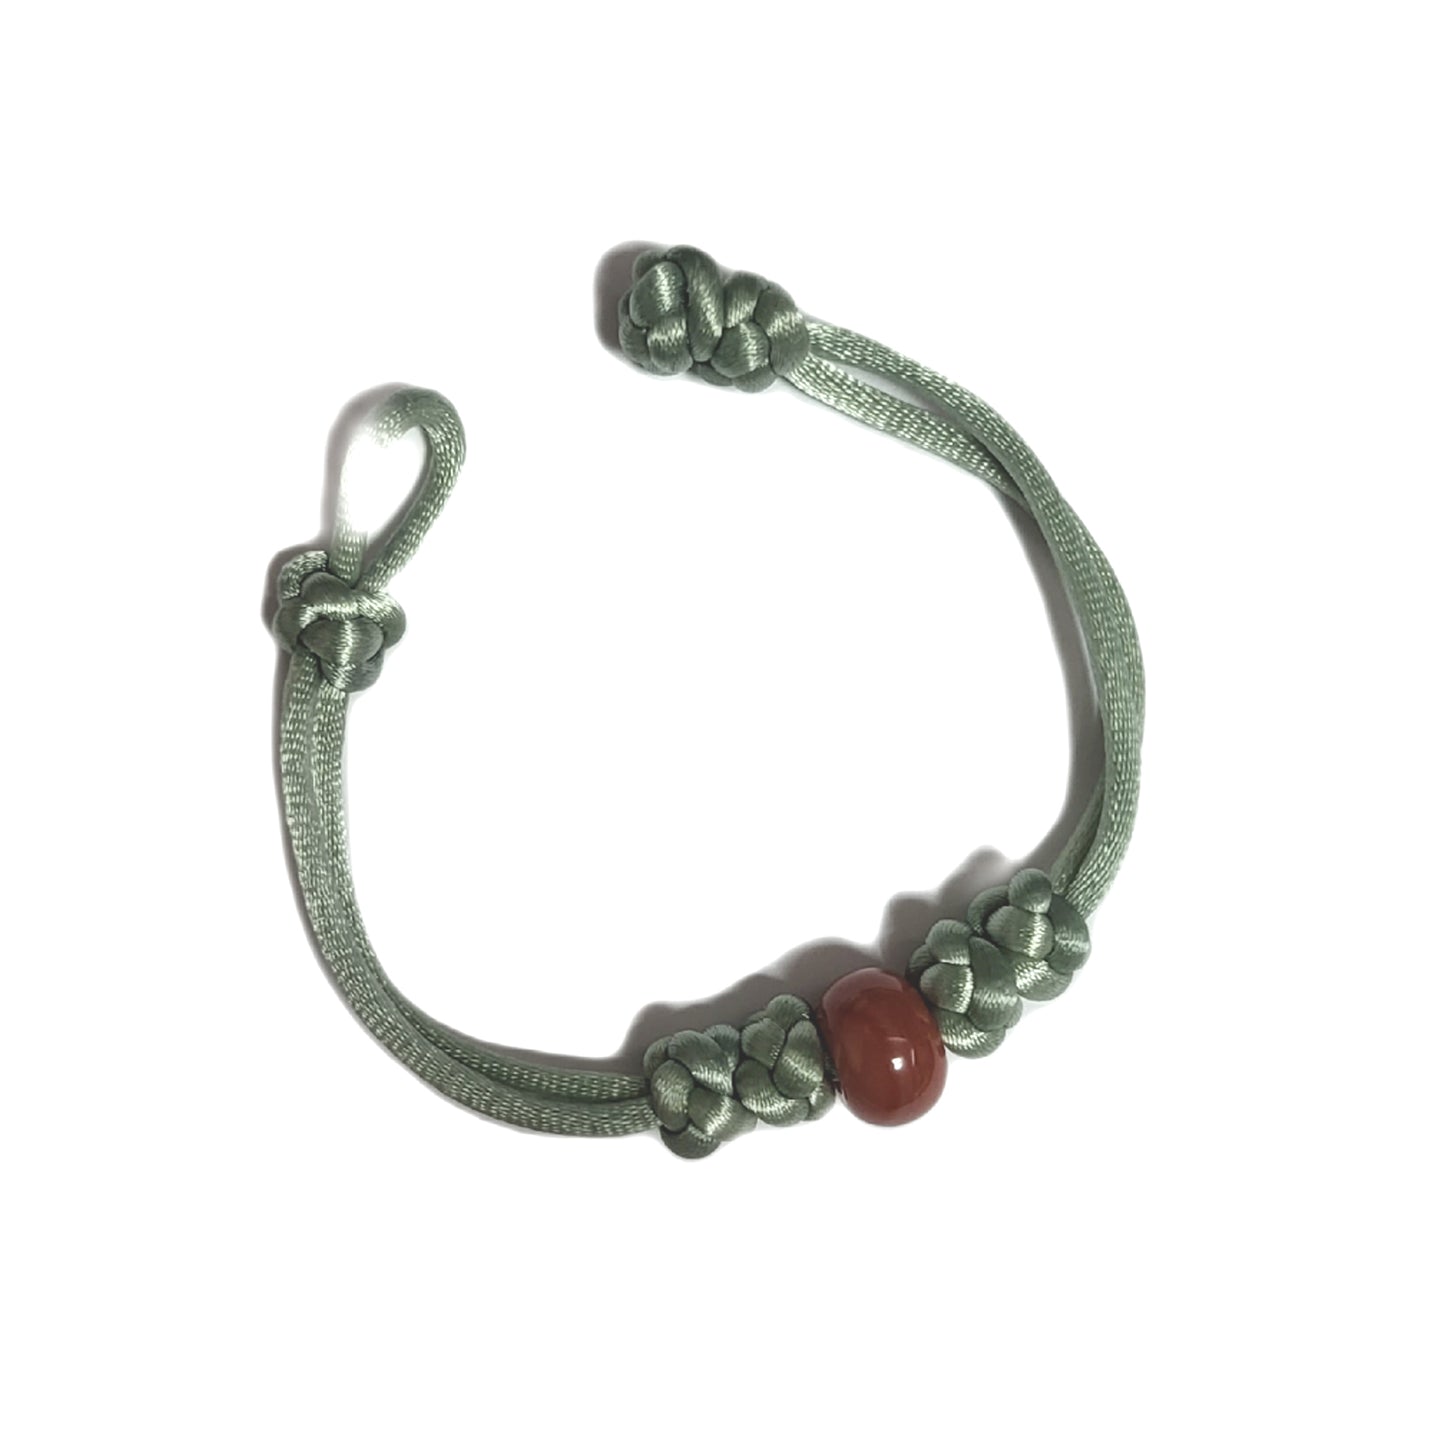 satin material knot bracelet, mint color . real stone decoration for accessory (not plastic)